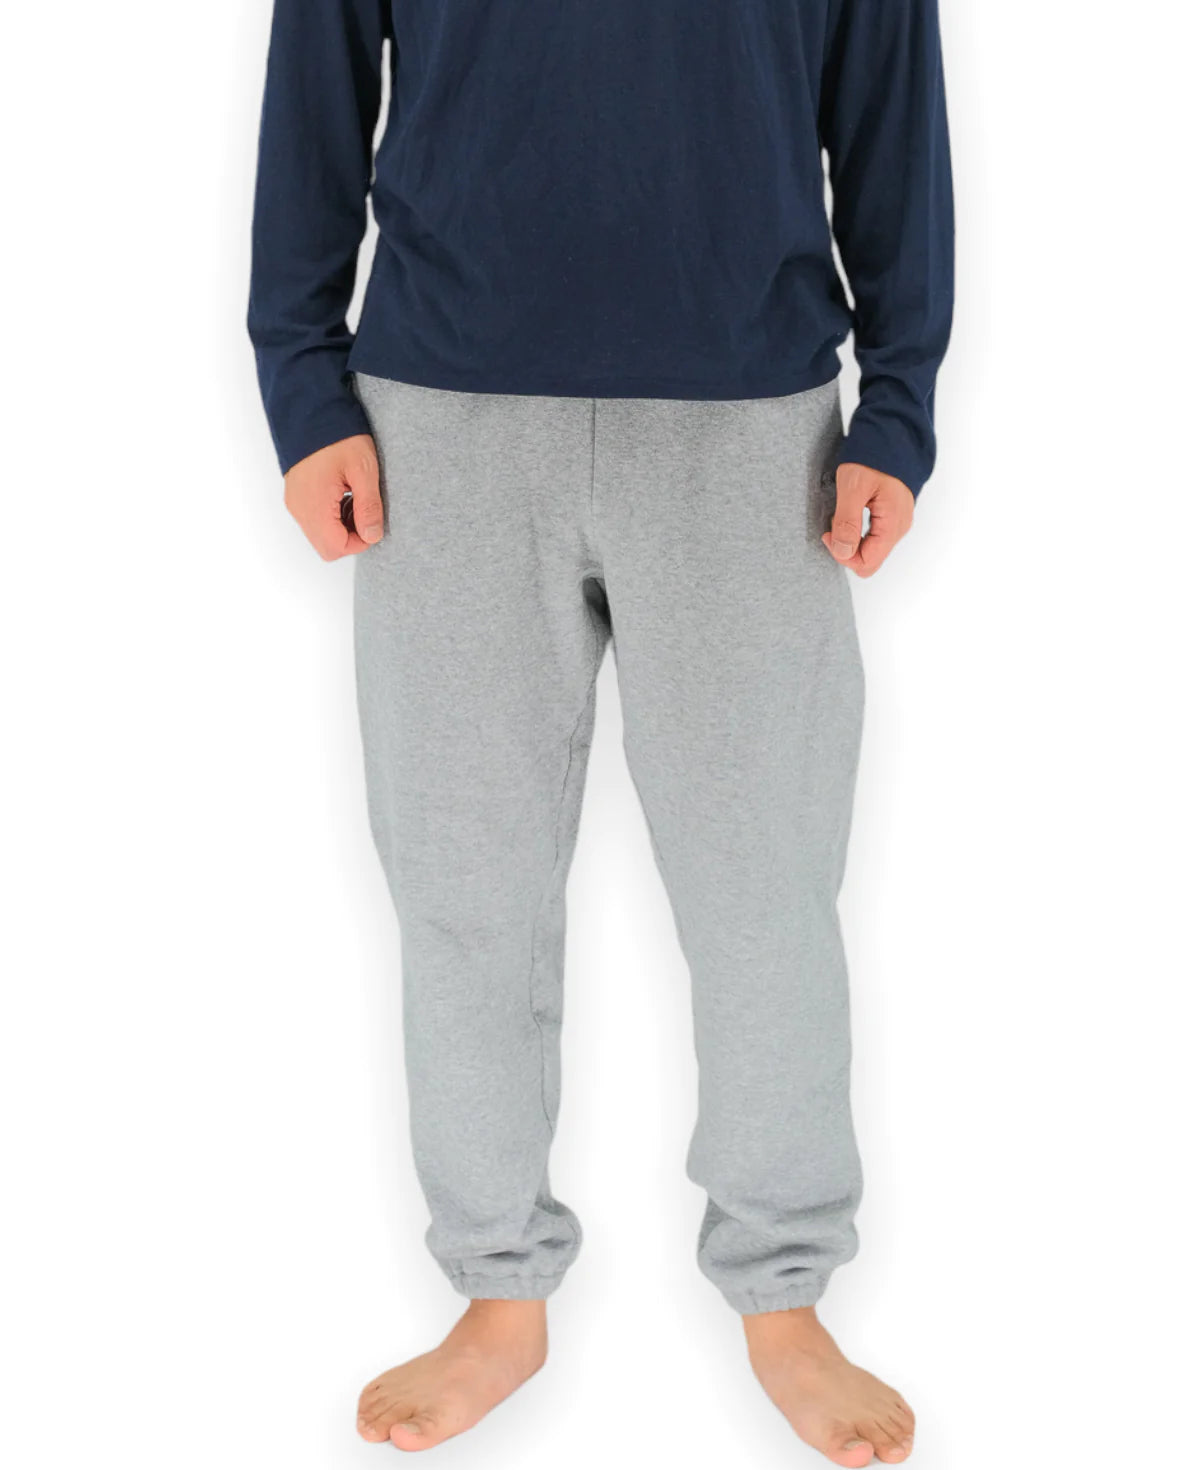 "SWEAT PANTS-RELAX FIT"